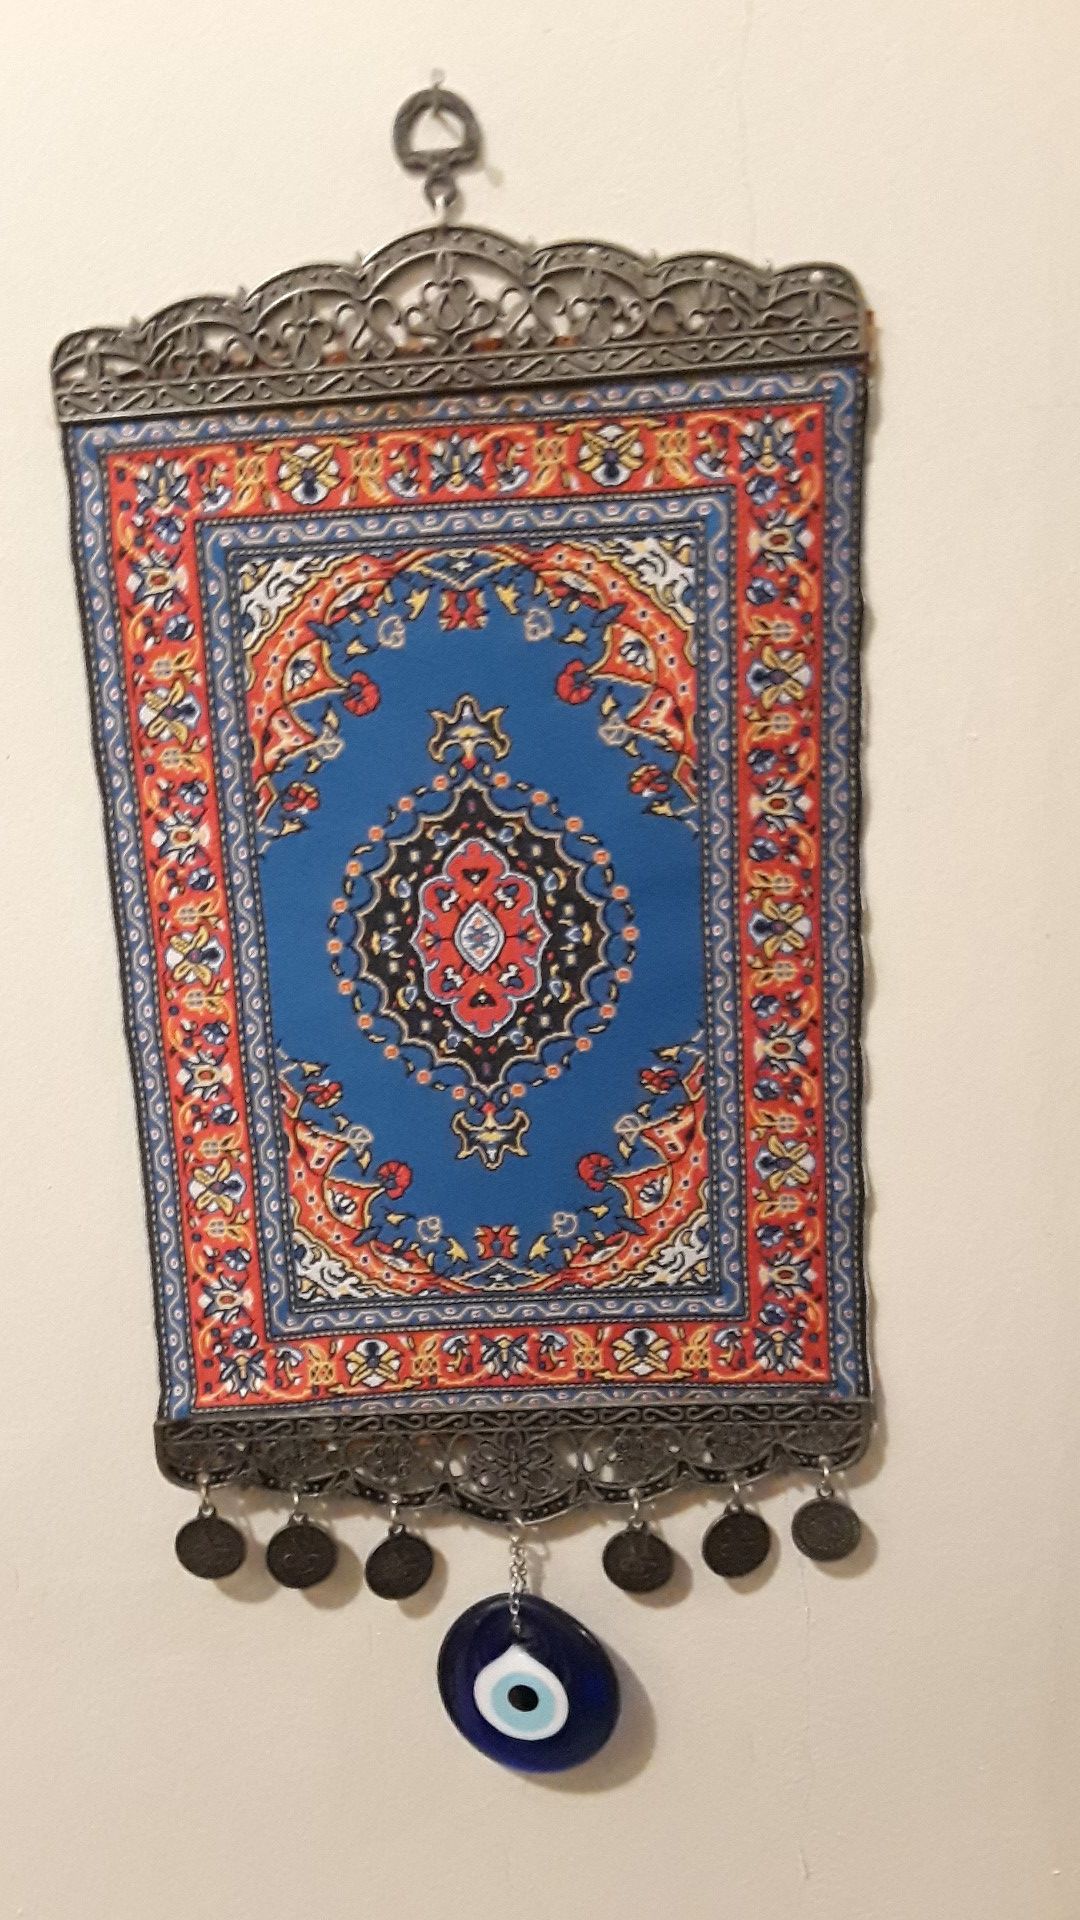 Gorgeous Turkish home decor for good luck and protection. Made in Turkey. 18"×8".